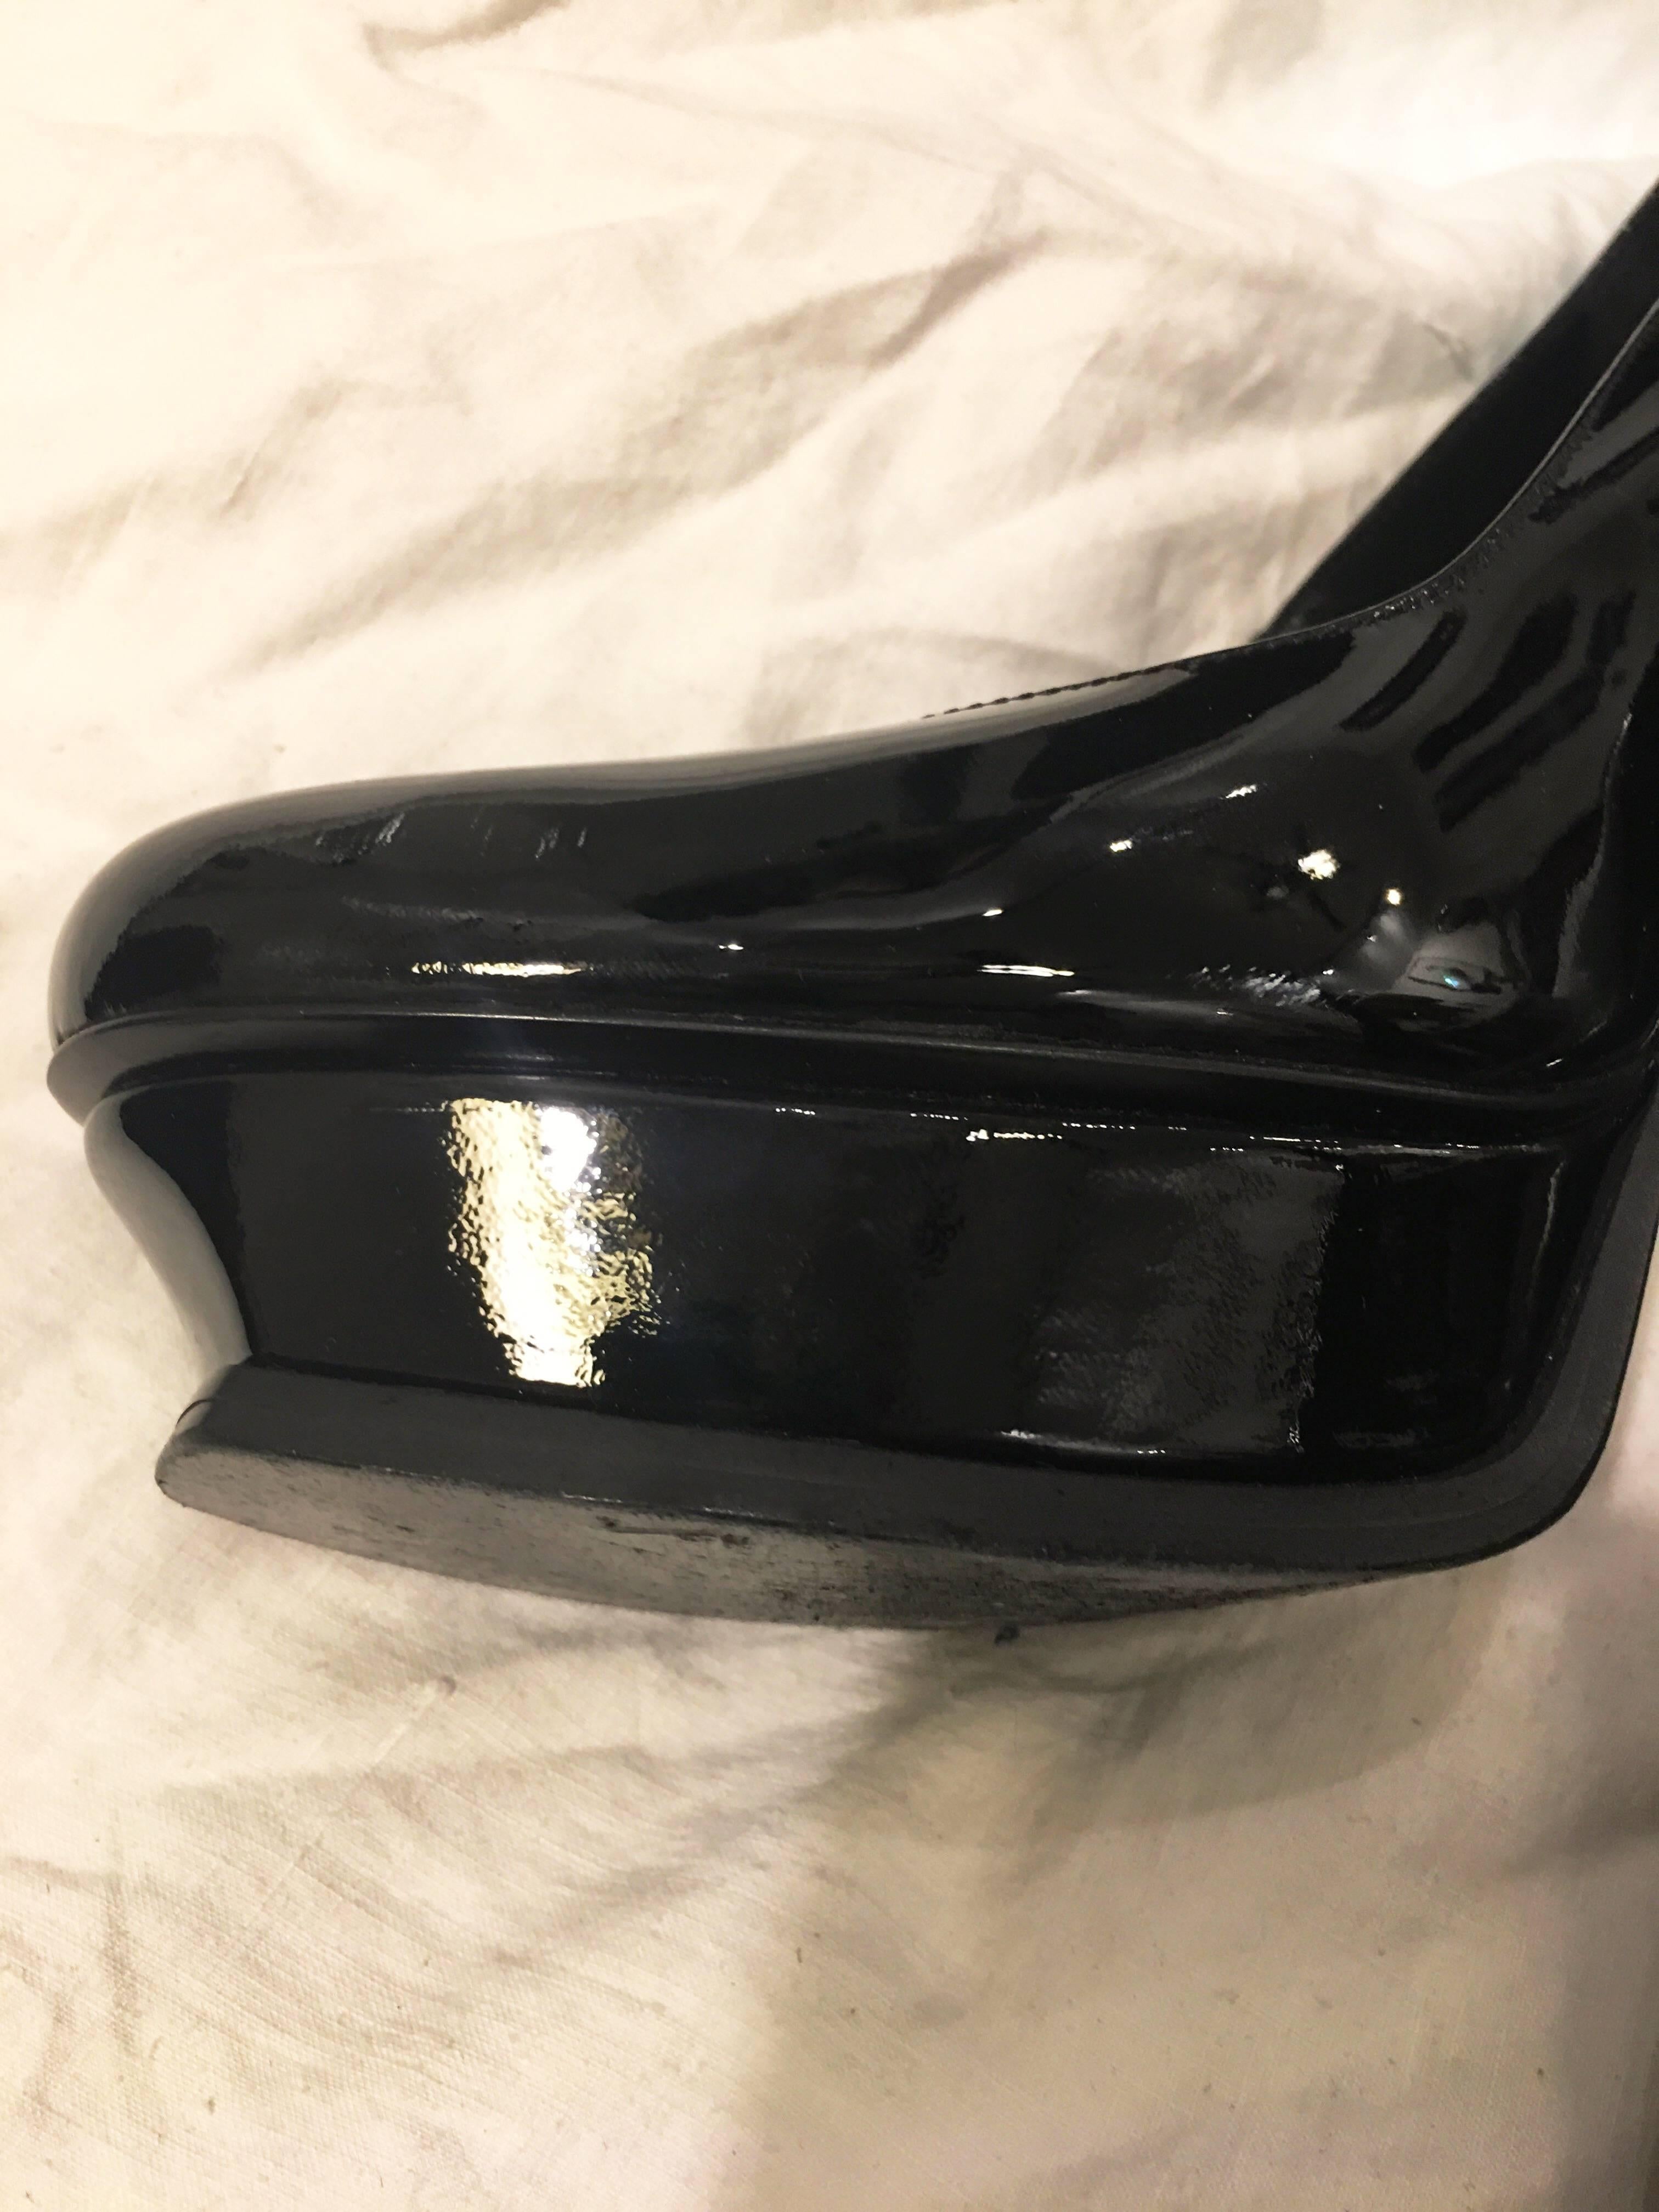 Not for those unaccustomed to wearing heels, these patent leather beauties command attention. 5.5 inch stiletto heels with an inch high platform at the toe. Some light scuffing on the heels. Made by the the forever classy Yves St Laurent and in